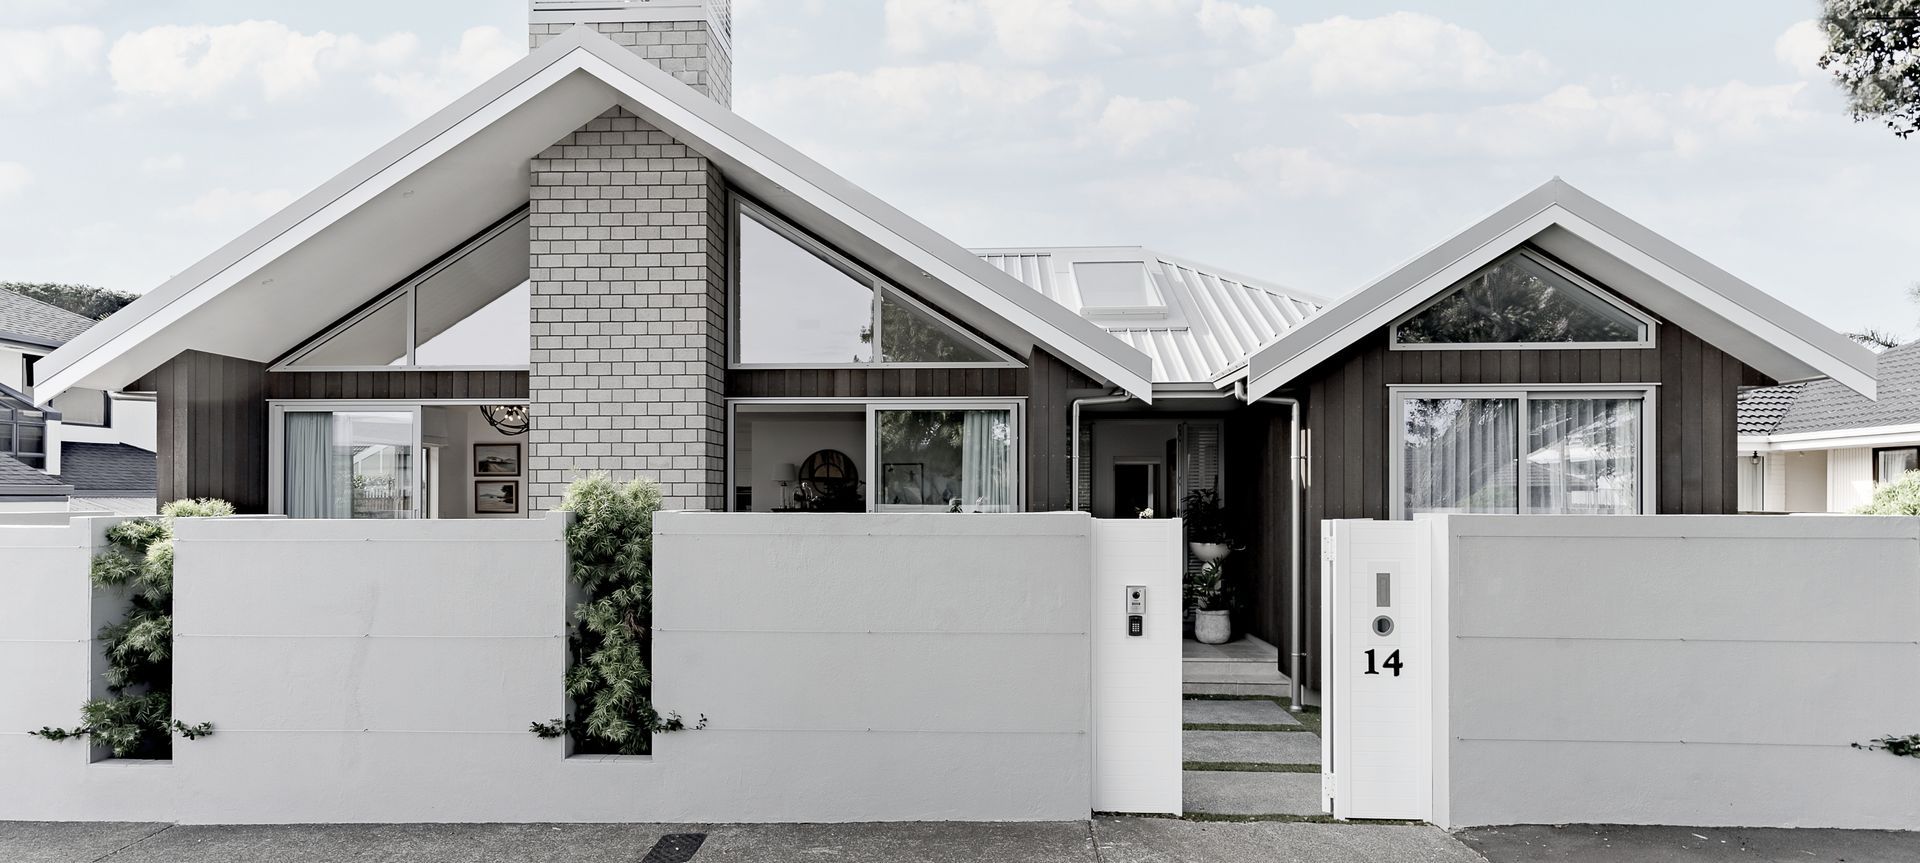 Transforming a 1950s bungalow into a modern, gable-roofed home banner